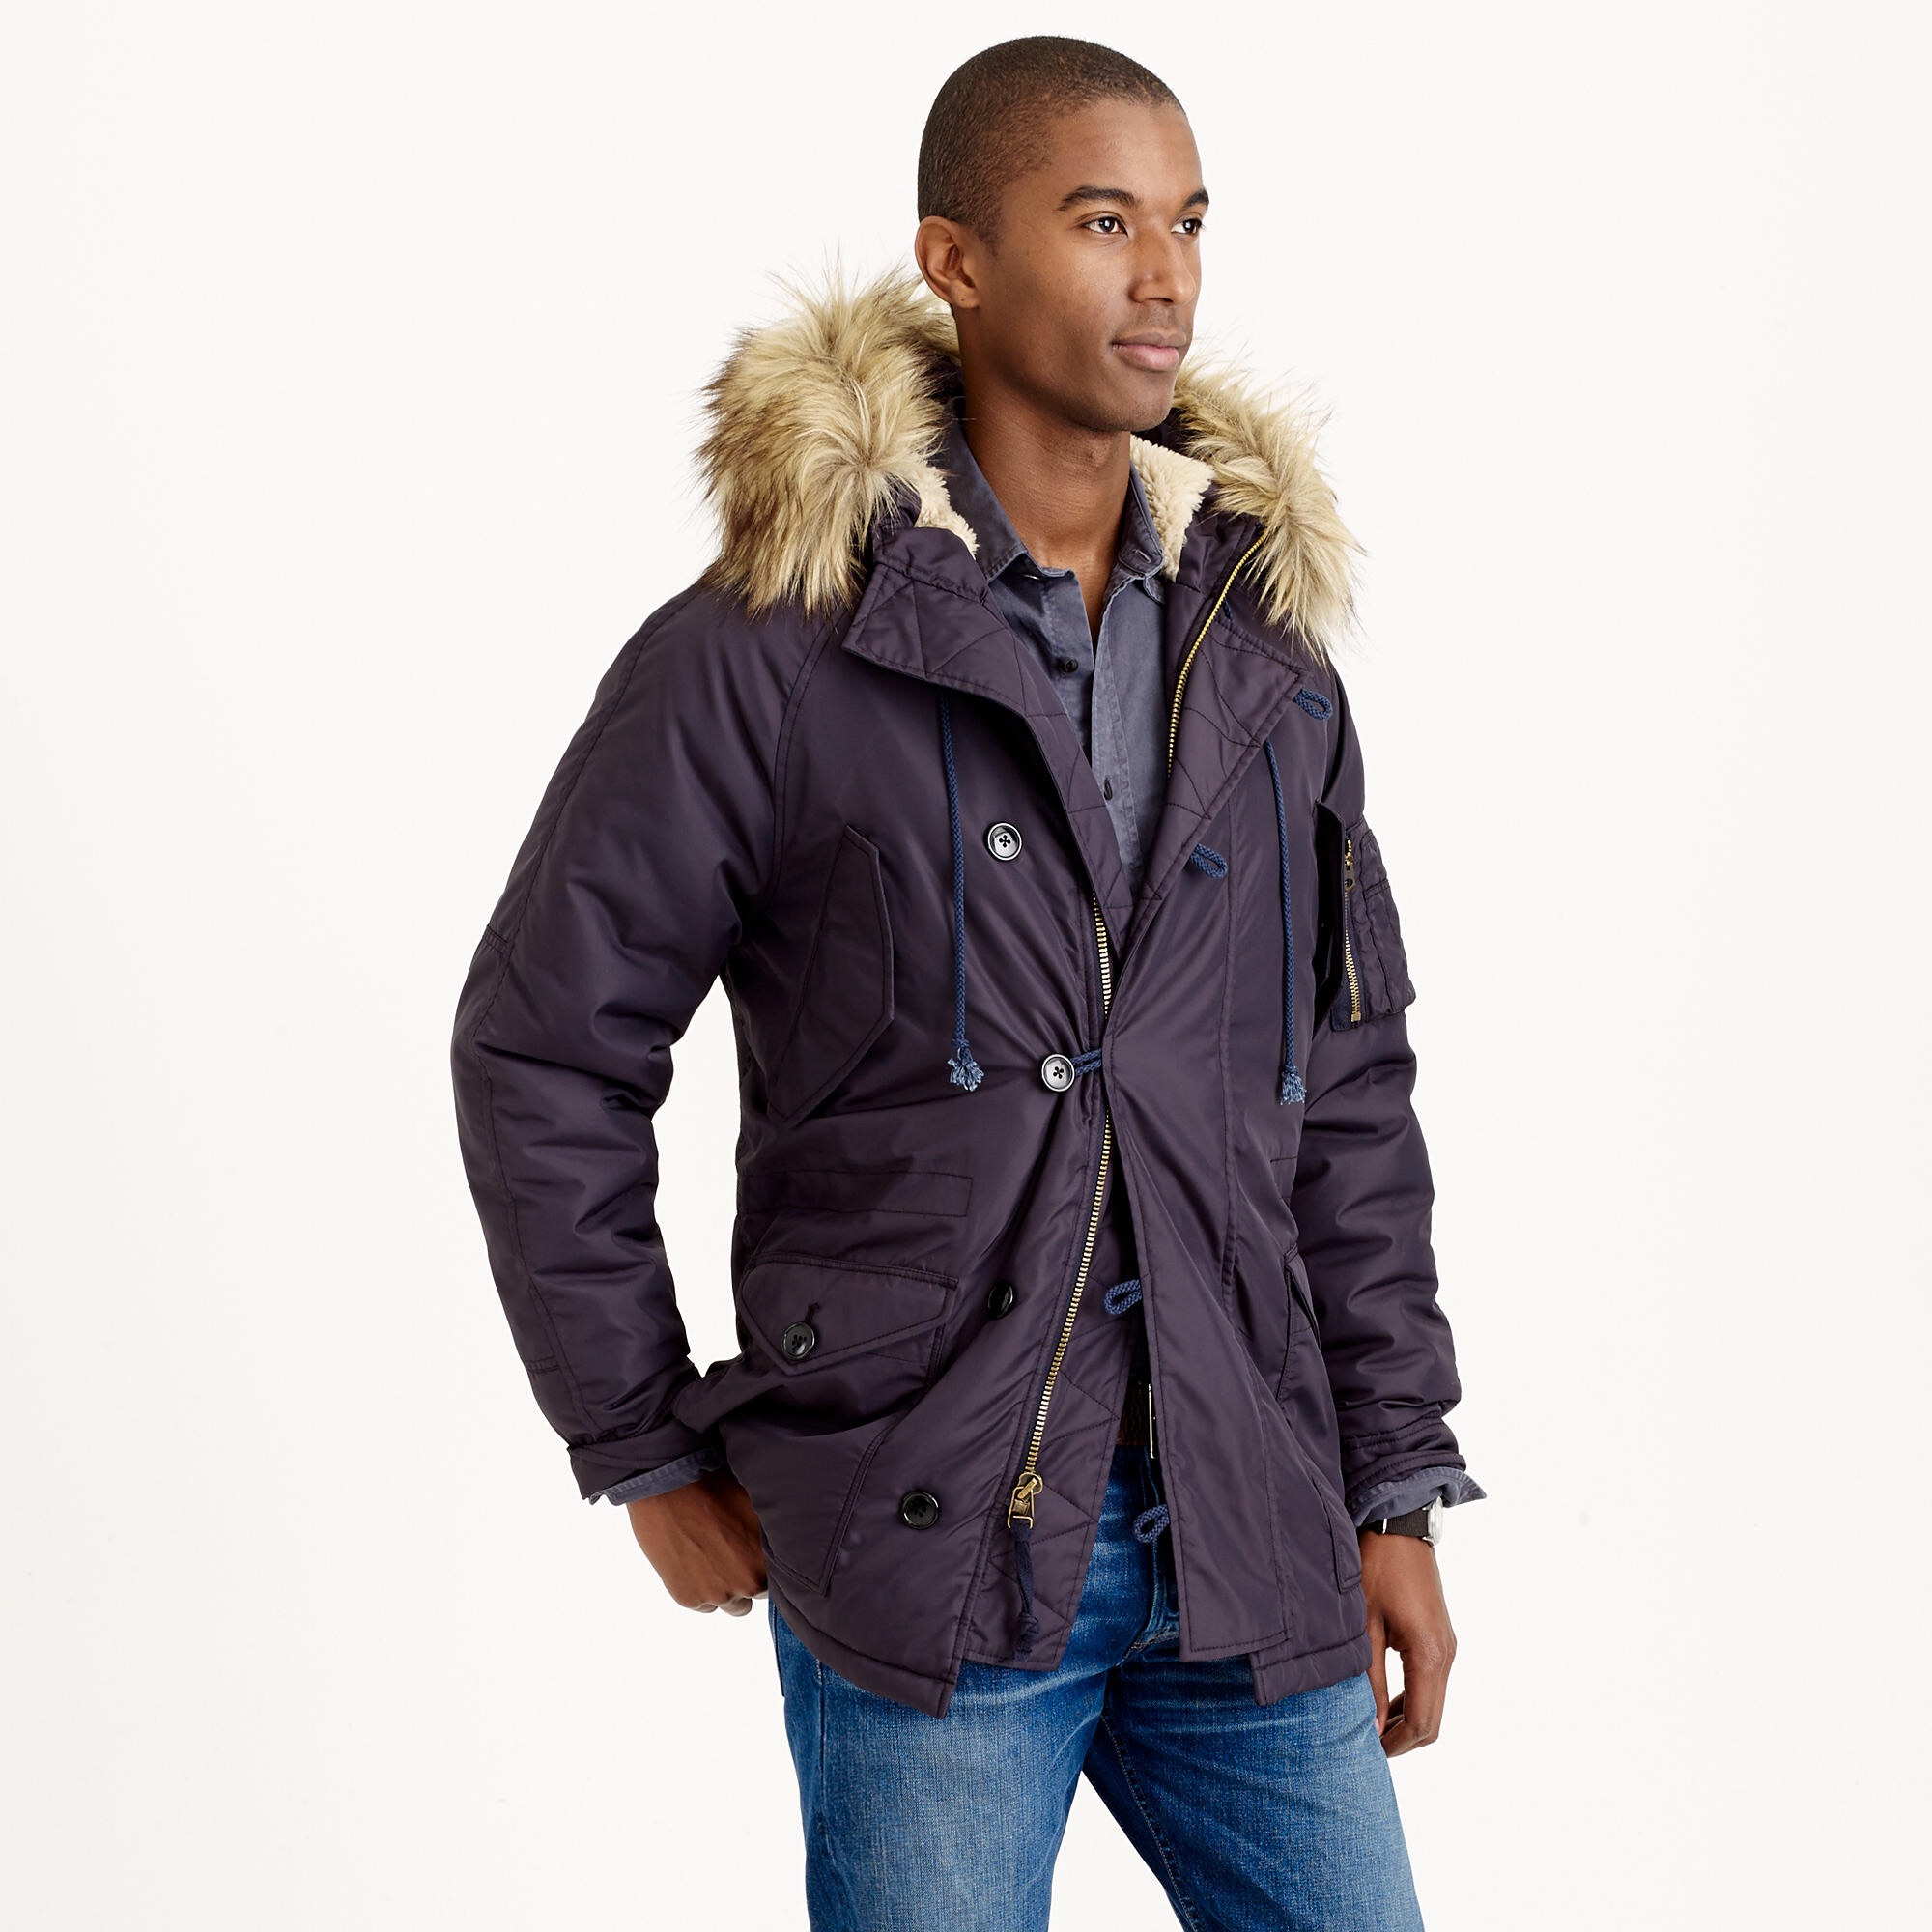 Winter Warmth with an Iconic Military Classic from J.Crew – George Hahn